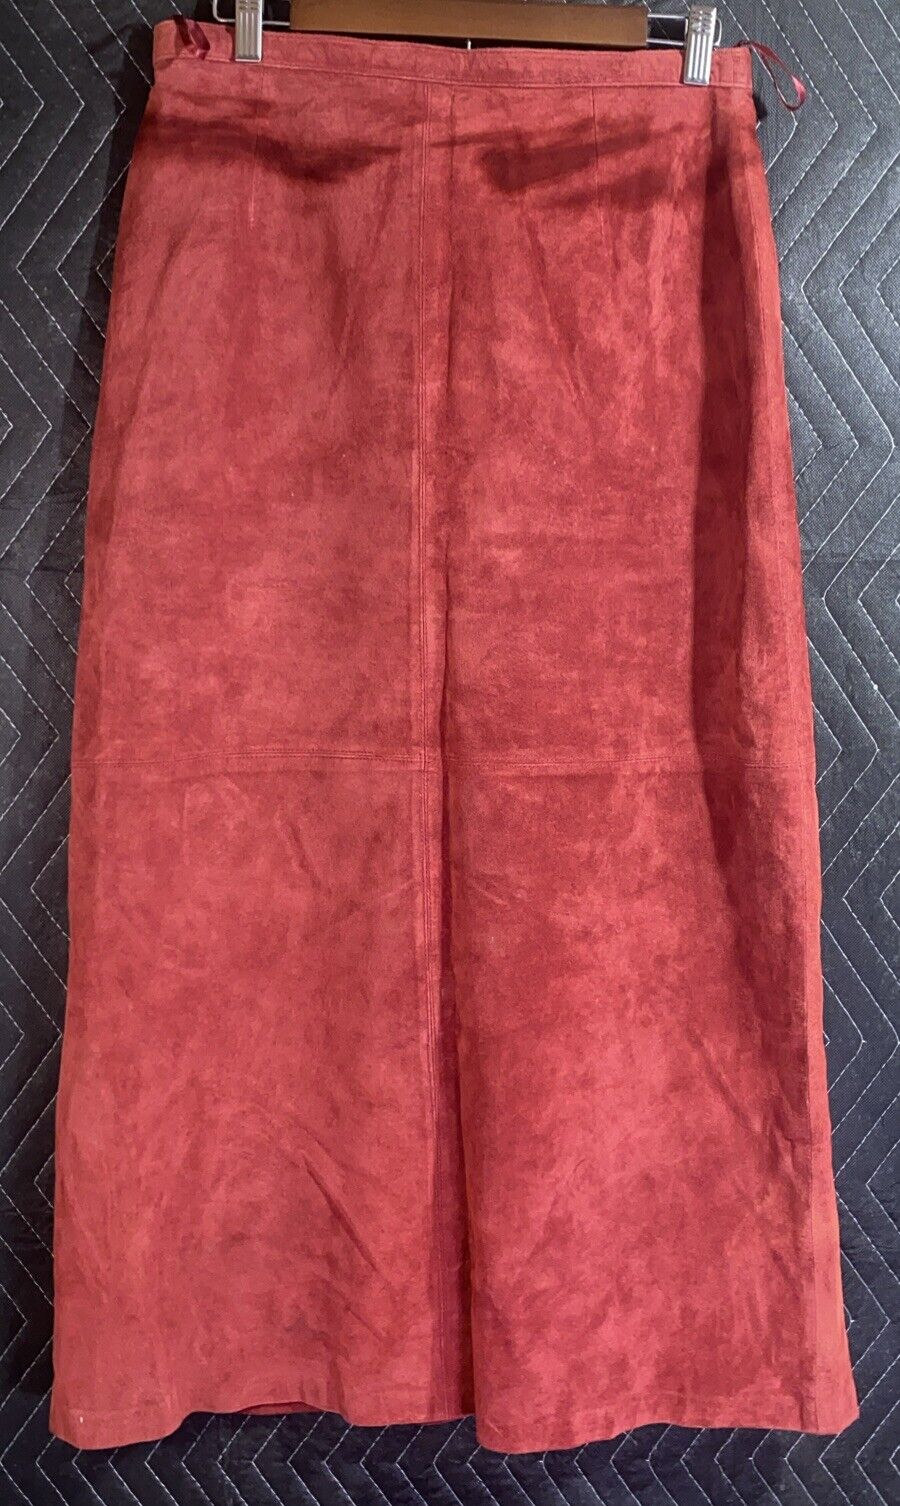 Suede Maxi Skirt Red Leather 90s Vintage Minimalist Size Womens 12